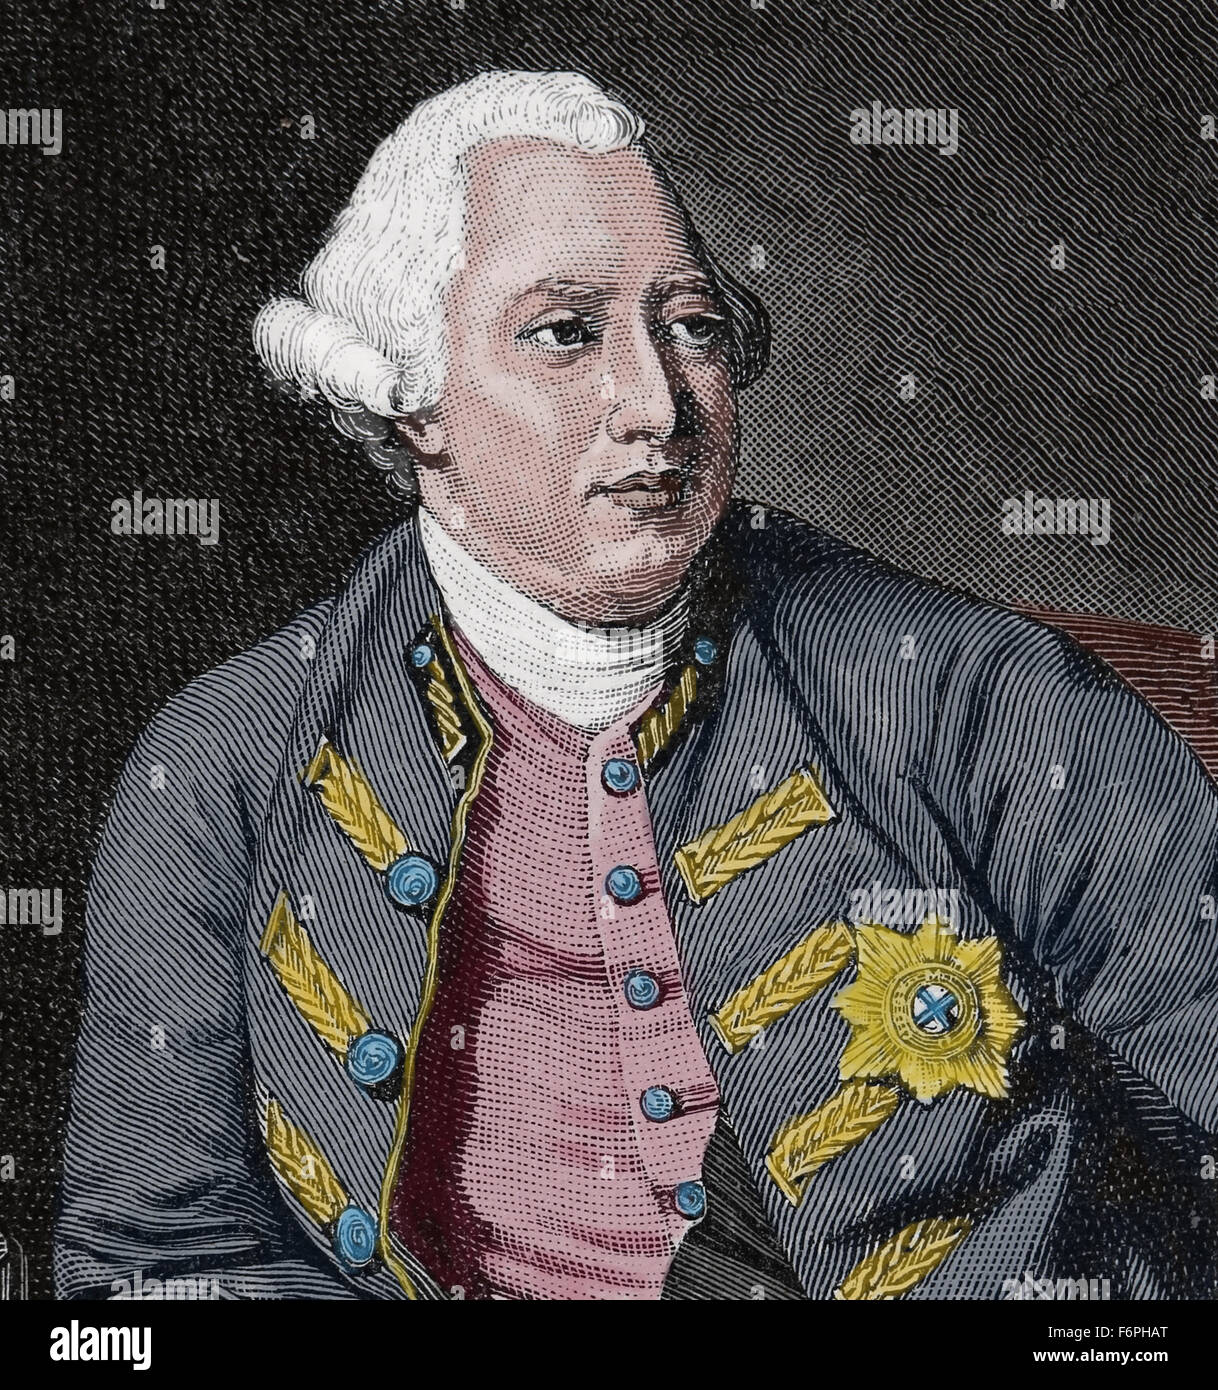 George III of the United Kingdom (1738-1820). King of Great Britain and Ireland. House of Hanover. Portrait. Engraving. Colored. Stock Photo